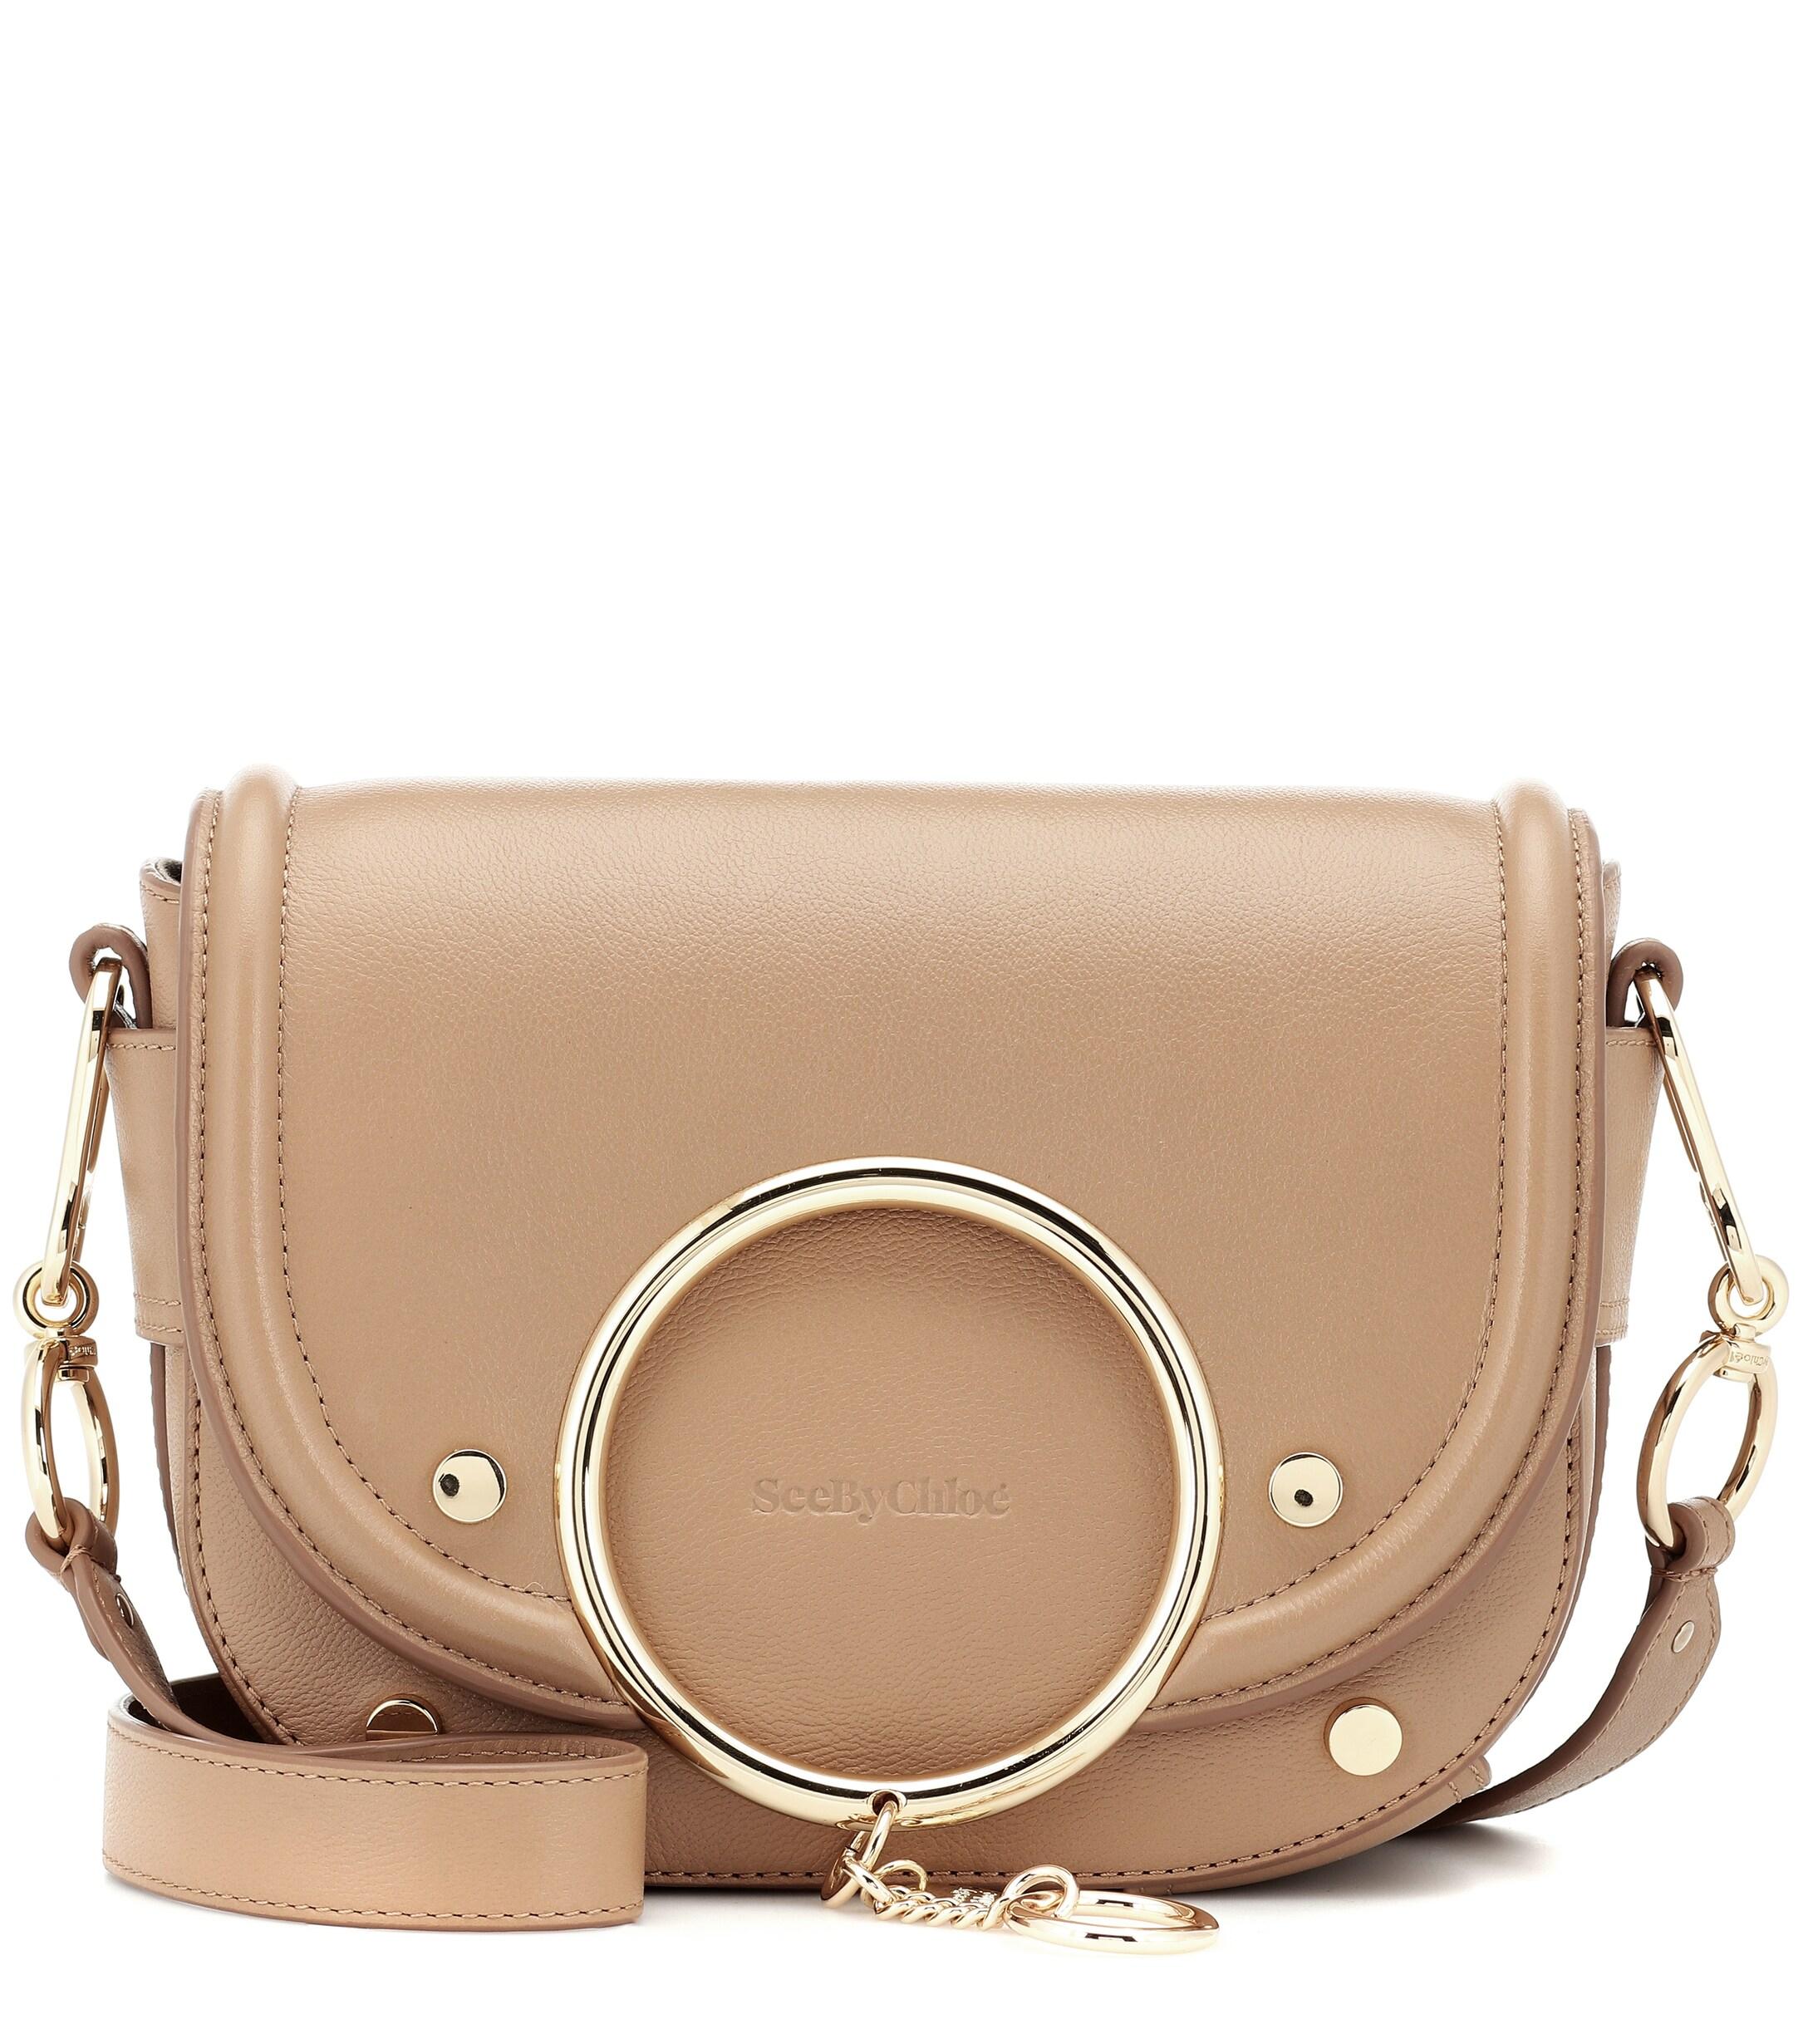 See By Chloé Leather Mara Satchel Bag in Brown Womens Bags Satchel bags and purses 